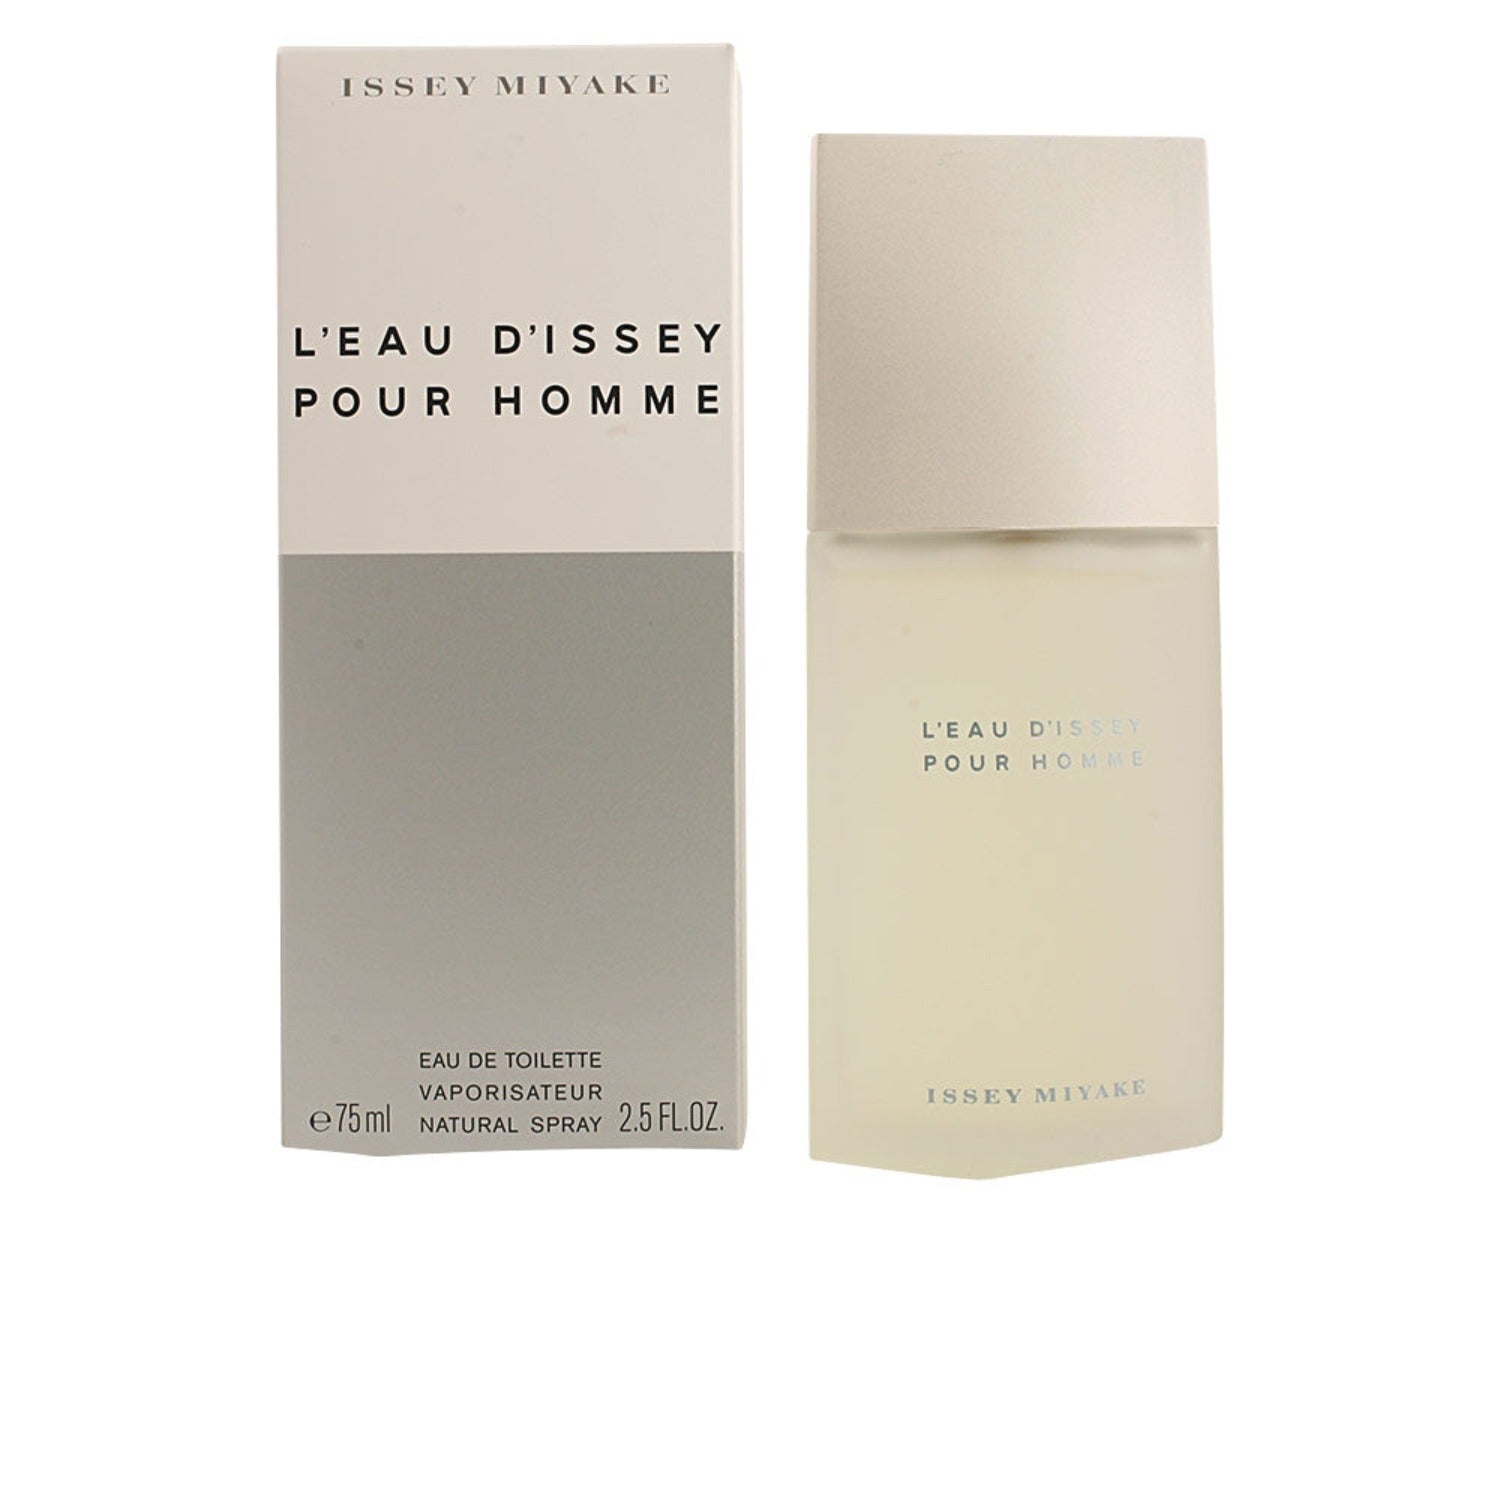 ISSEY MIYAKE  D'ISSEY POUR HOMME Eau de Toilette spray